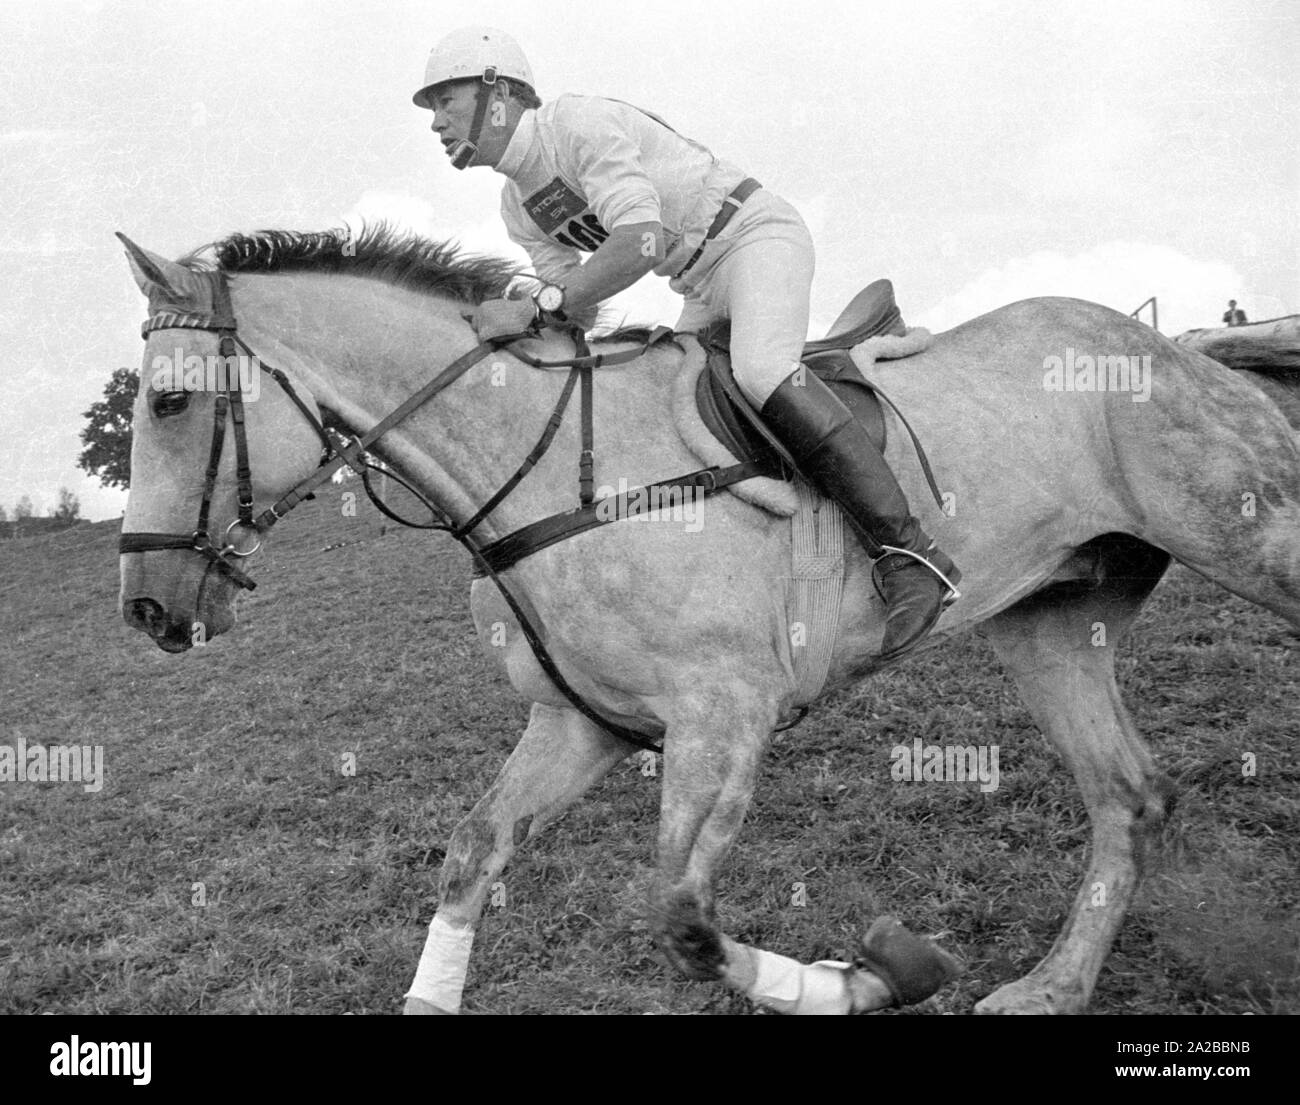 Competition in eventing, also known as military riding. The picture shows perhaps the European Eventing Championships 1971 at Burghley House in England. Stock Photo